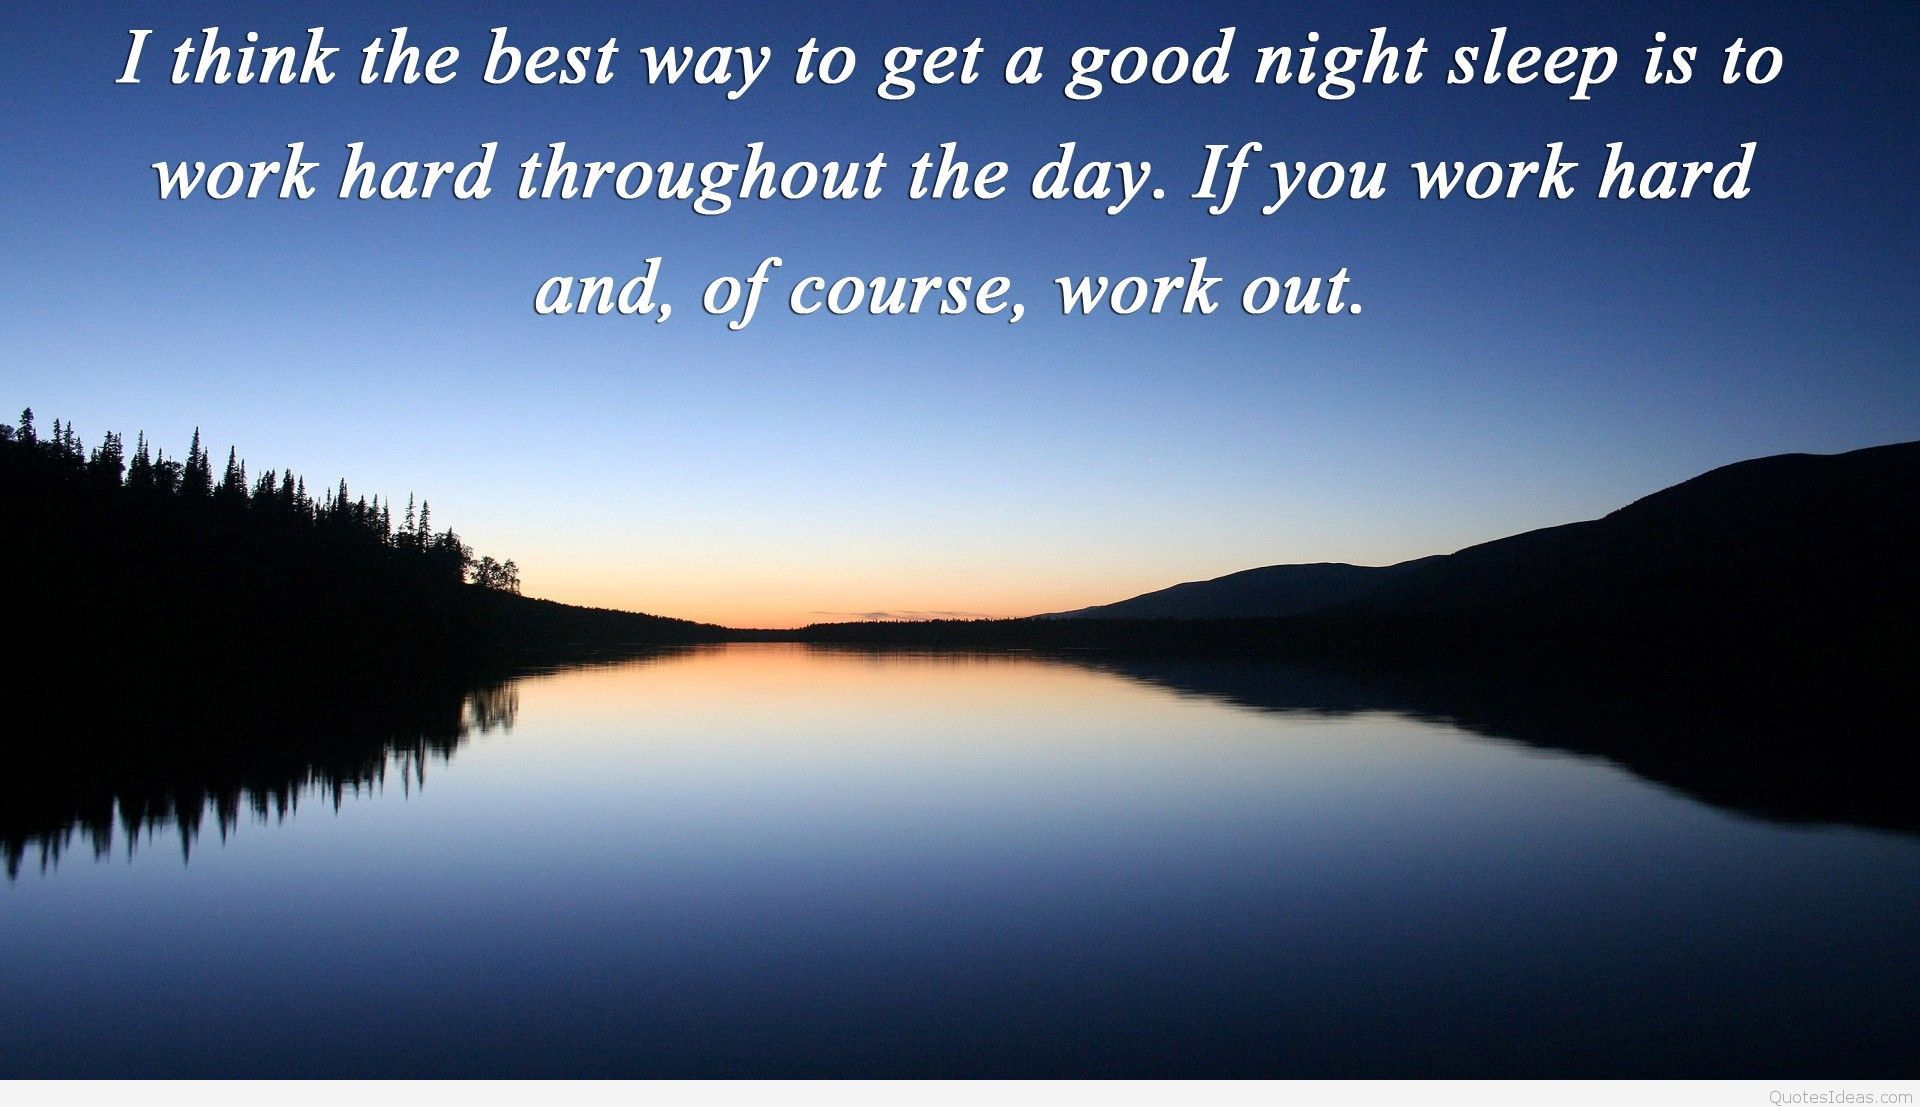 Best good night quotes wallpaper HD cards